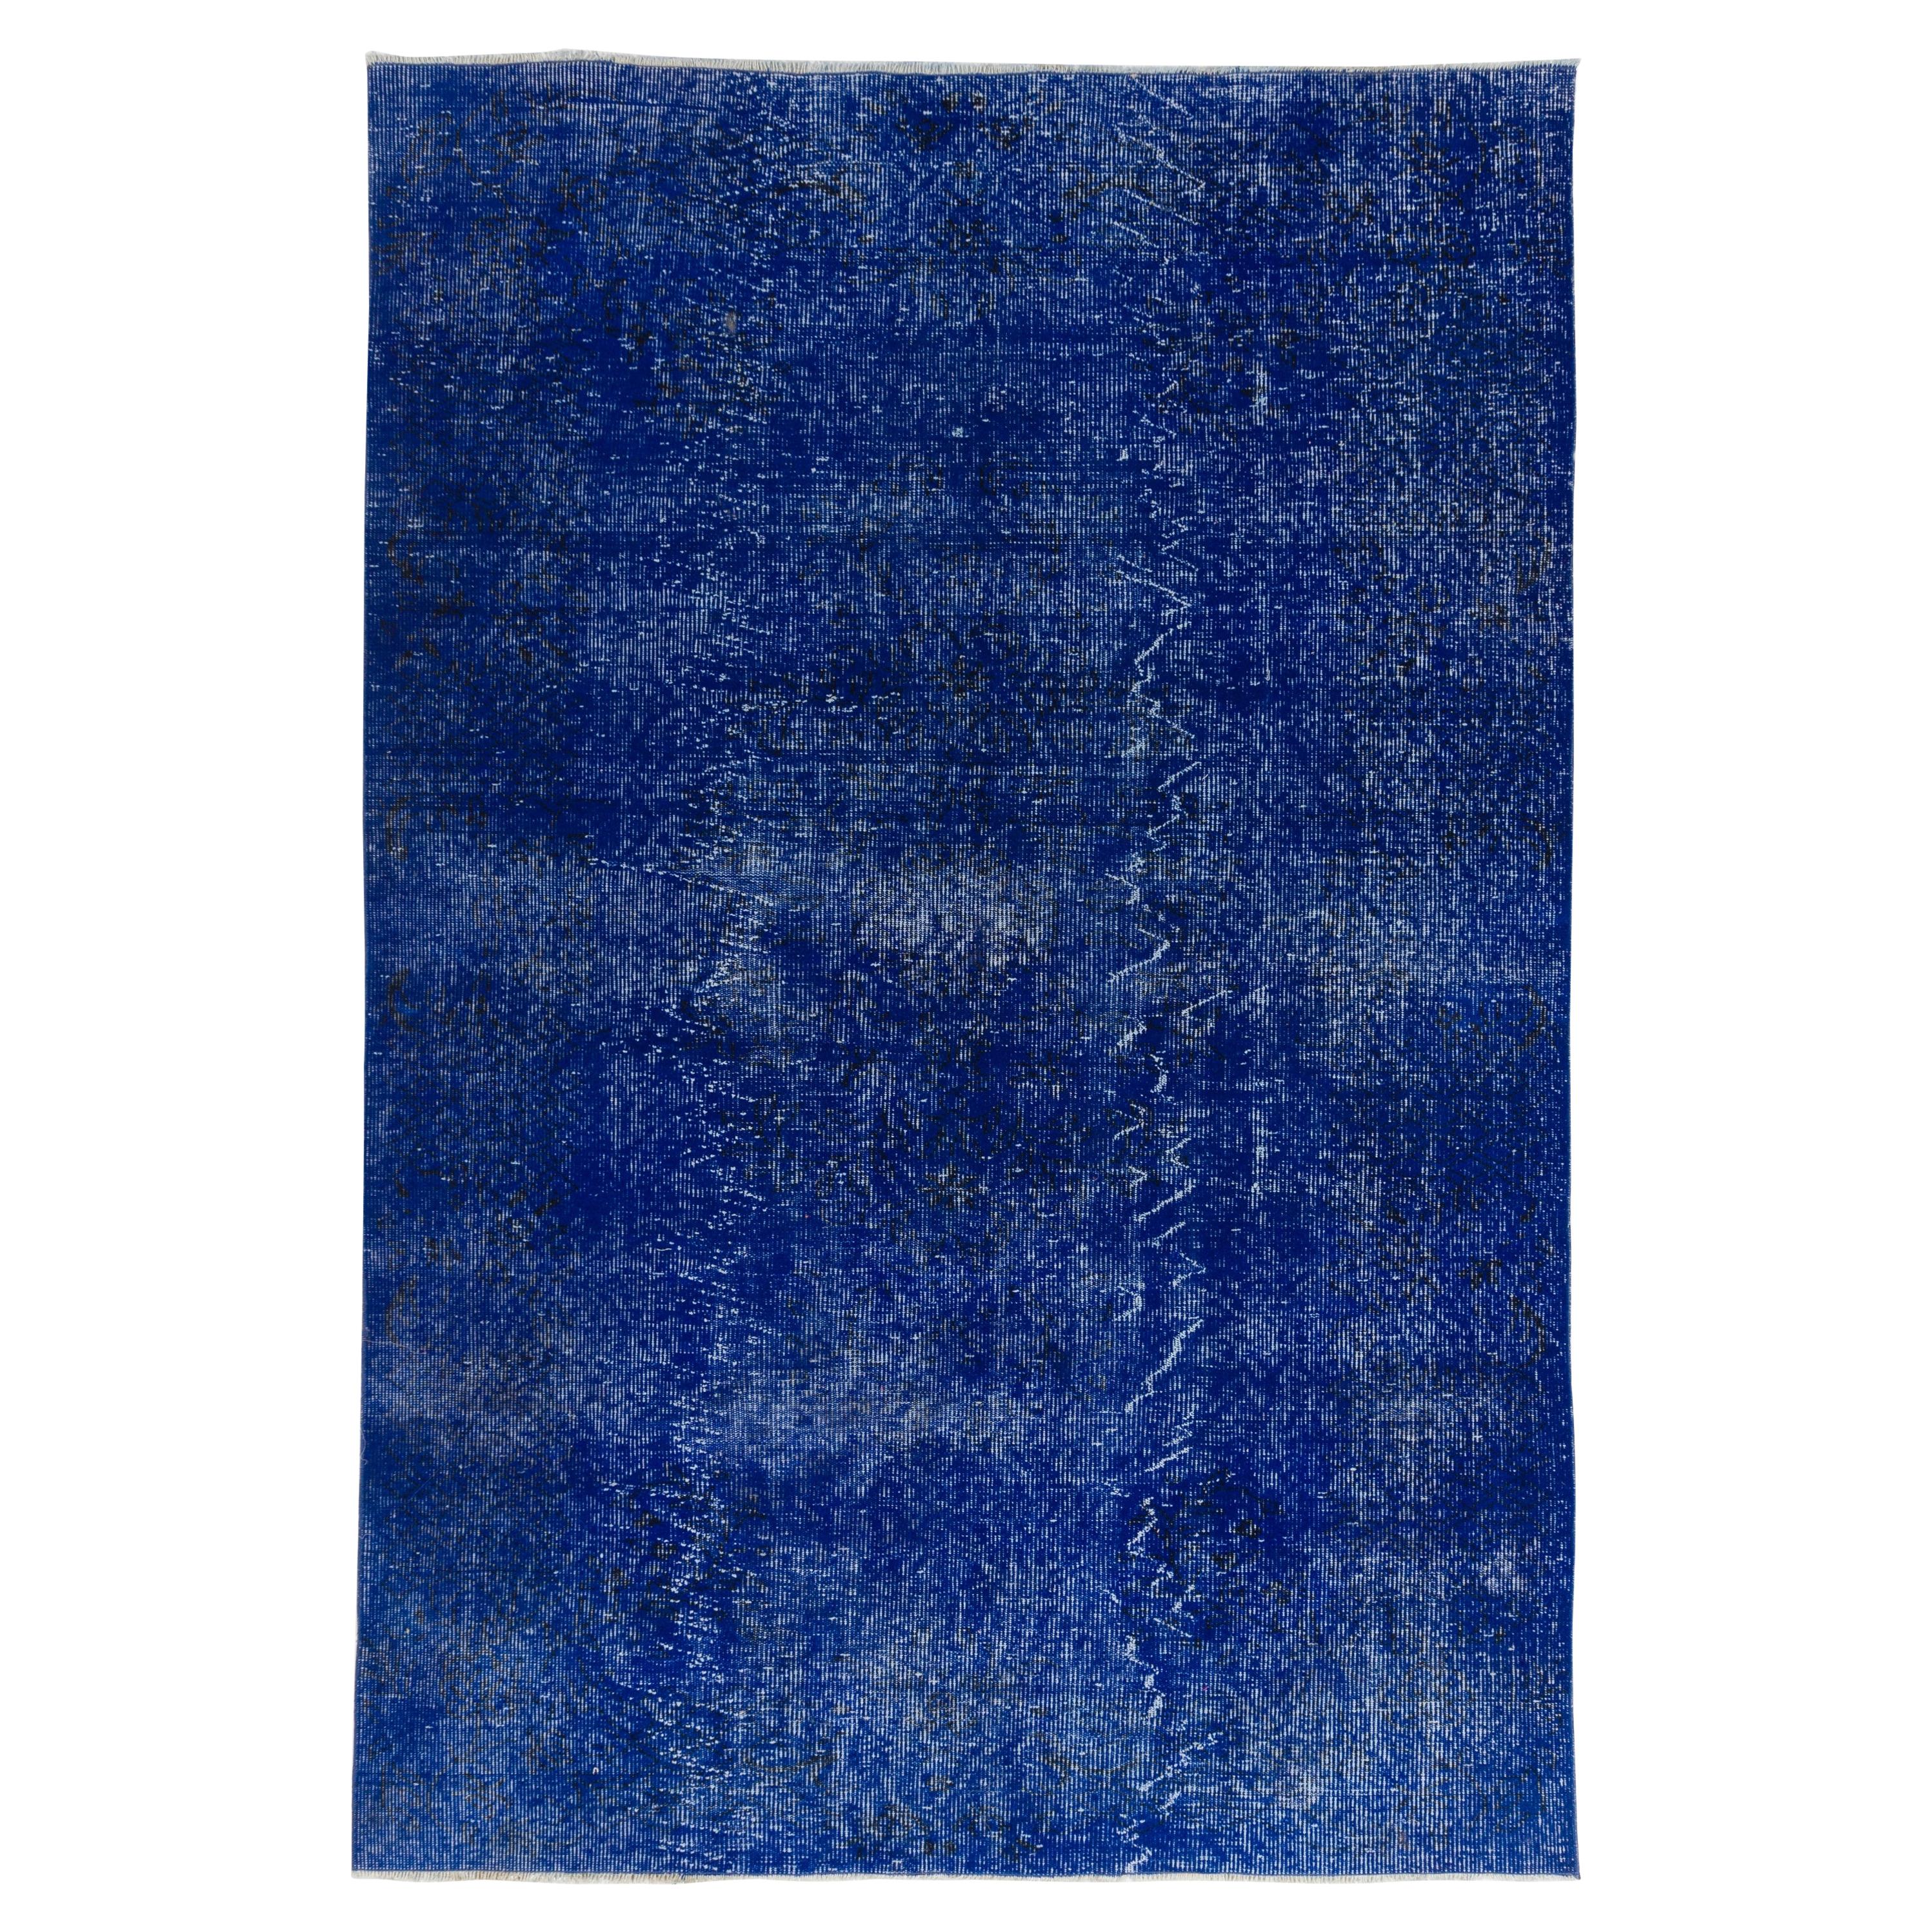 6.4x9.6 Ft Handmade Area Rug in Blue. Great 4 Modern Interior. Turkish Carpet For Sale